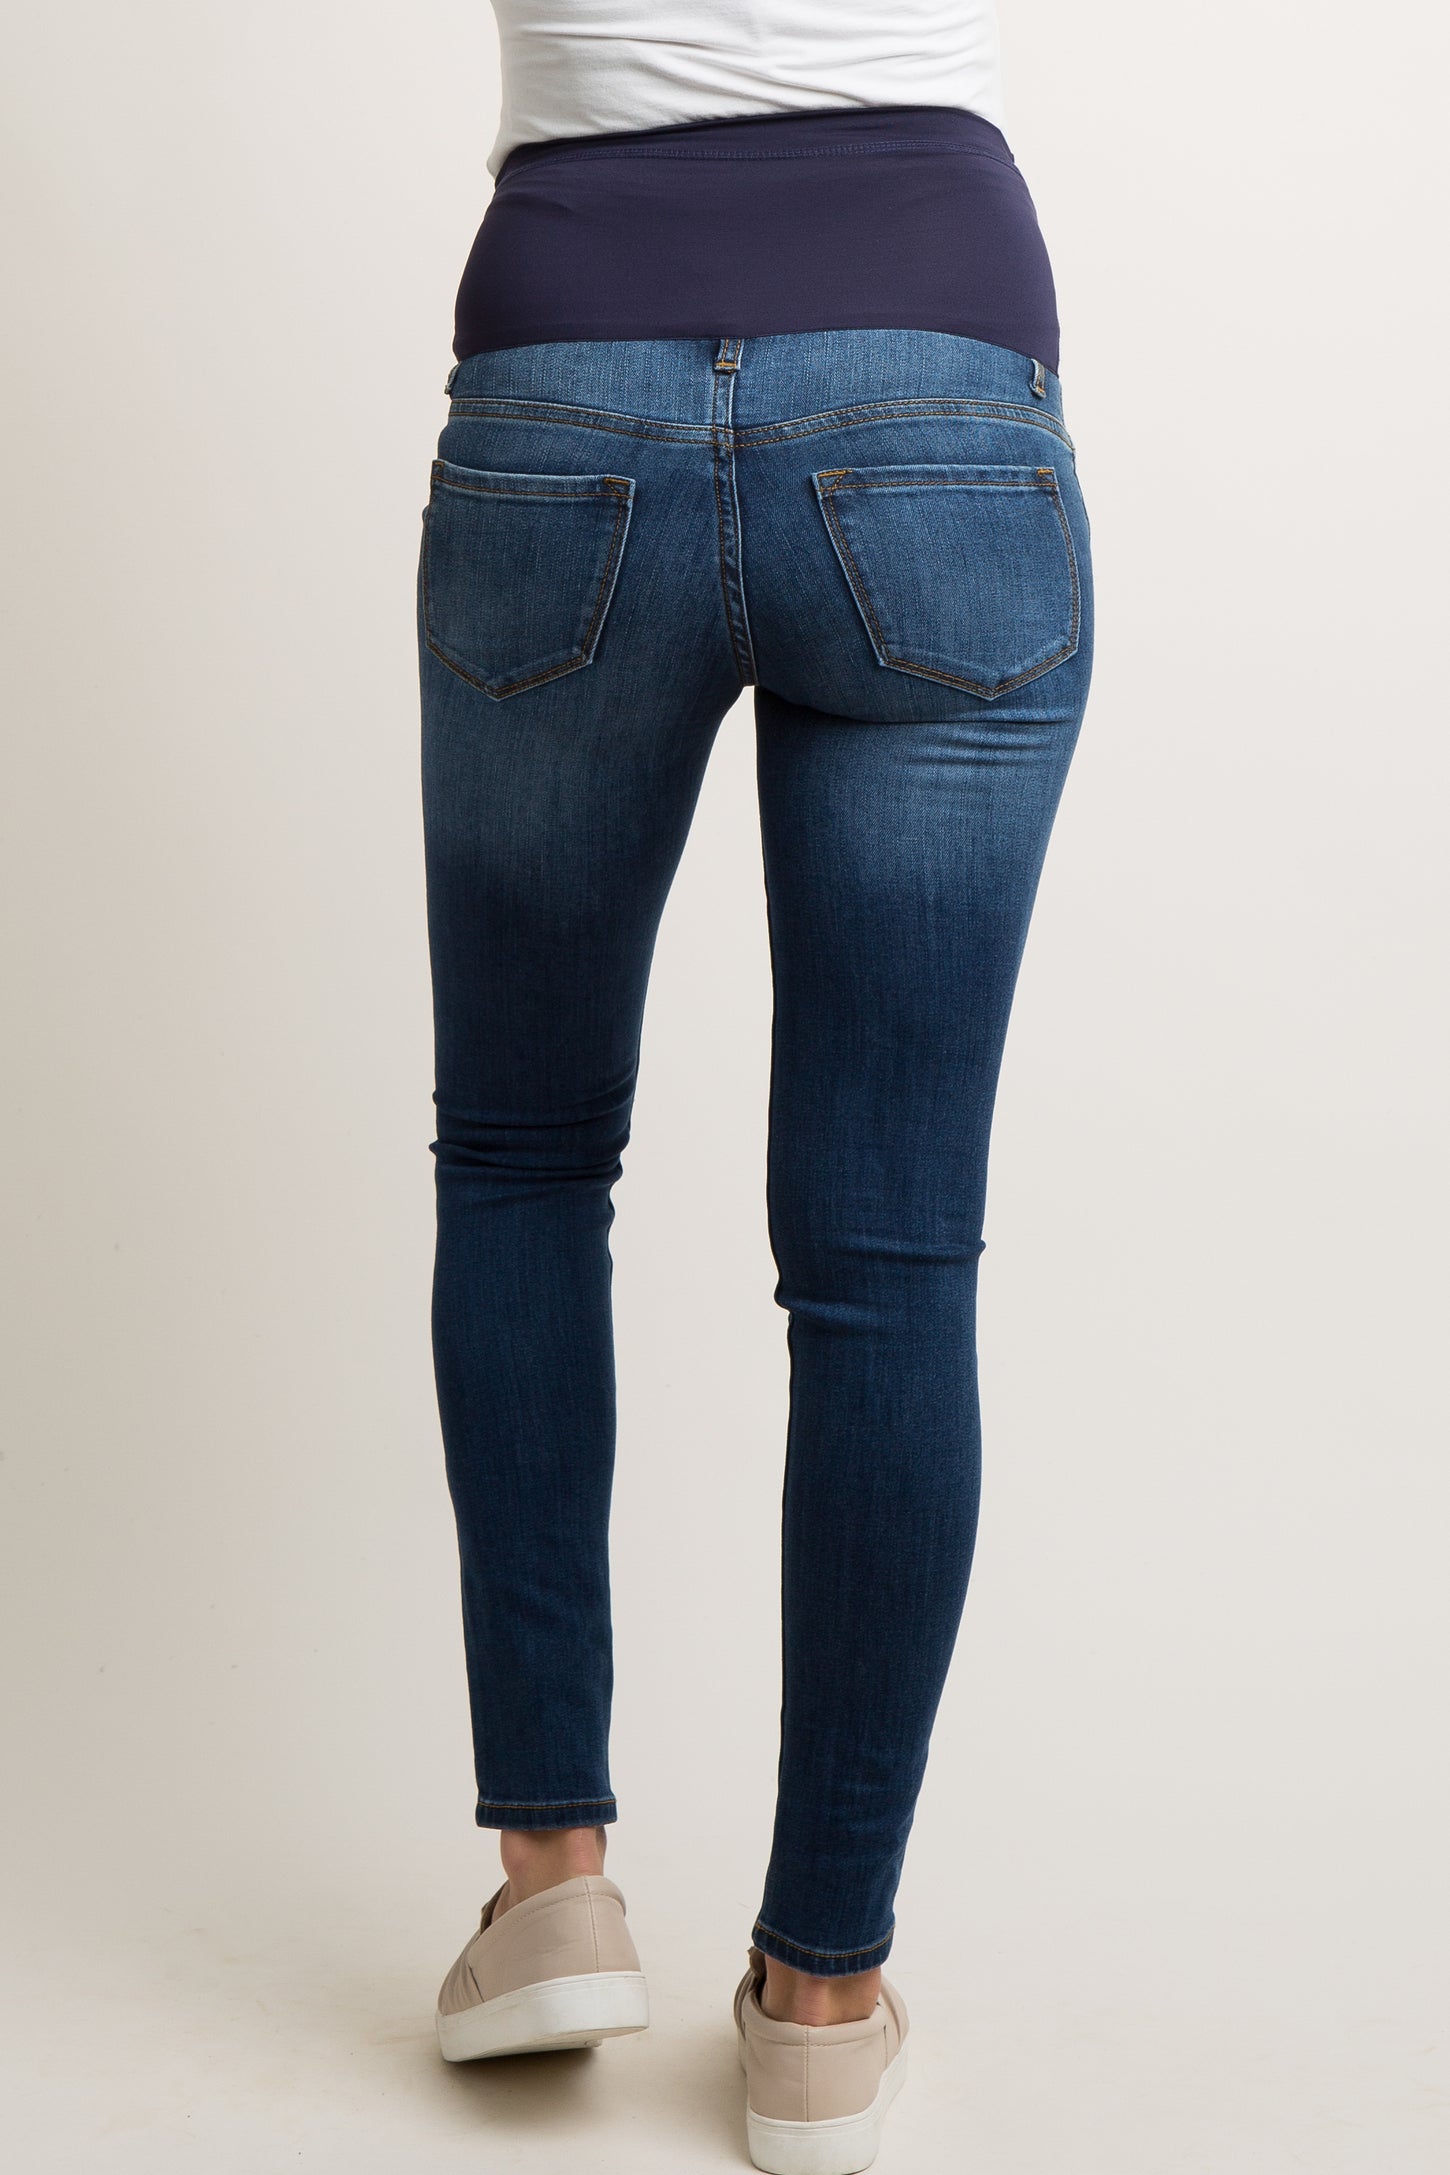 Blue Faded Wash Maternity Skinny Jeans